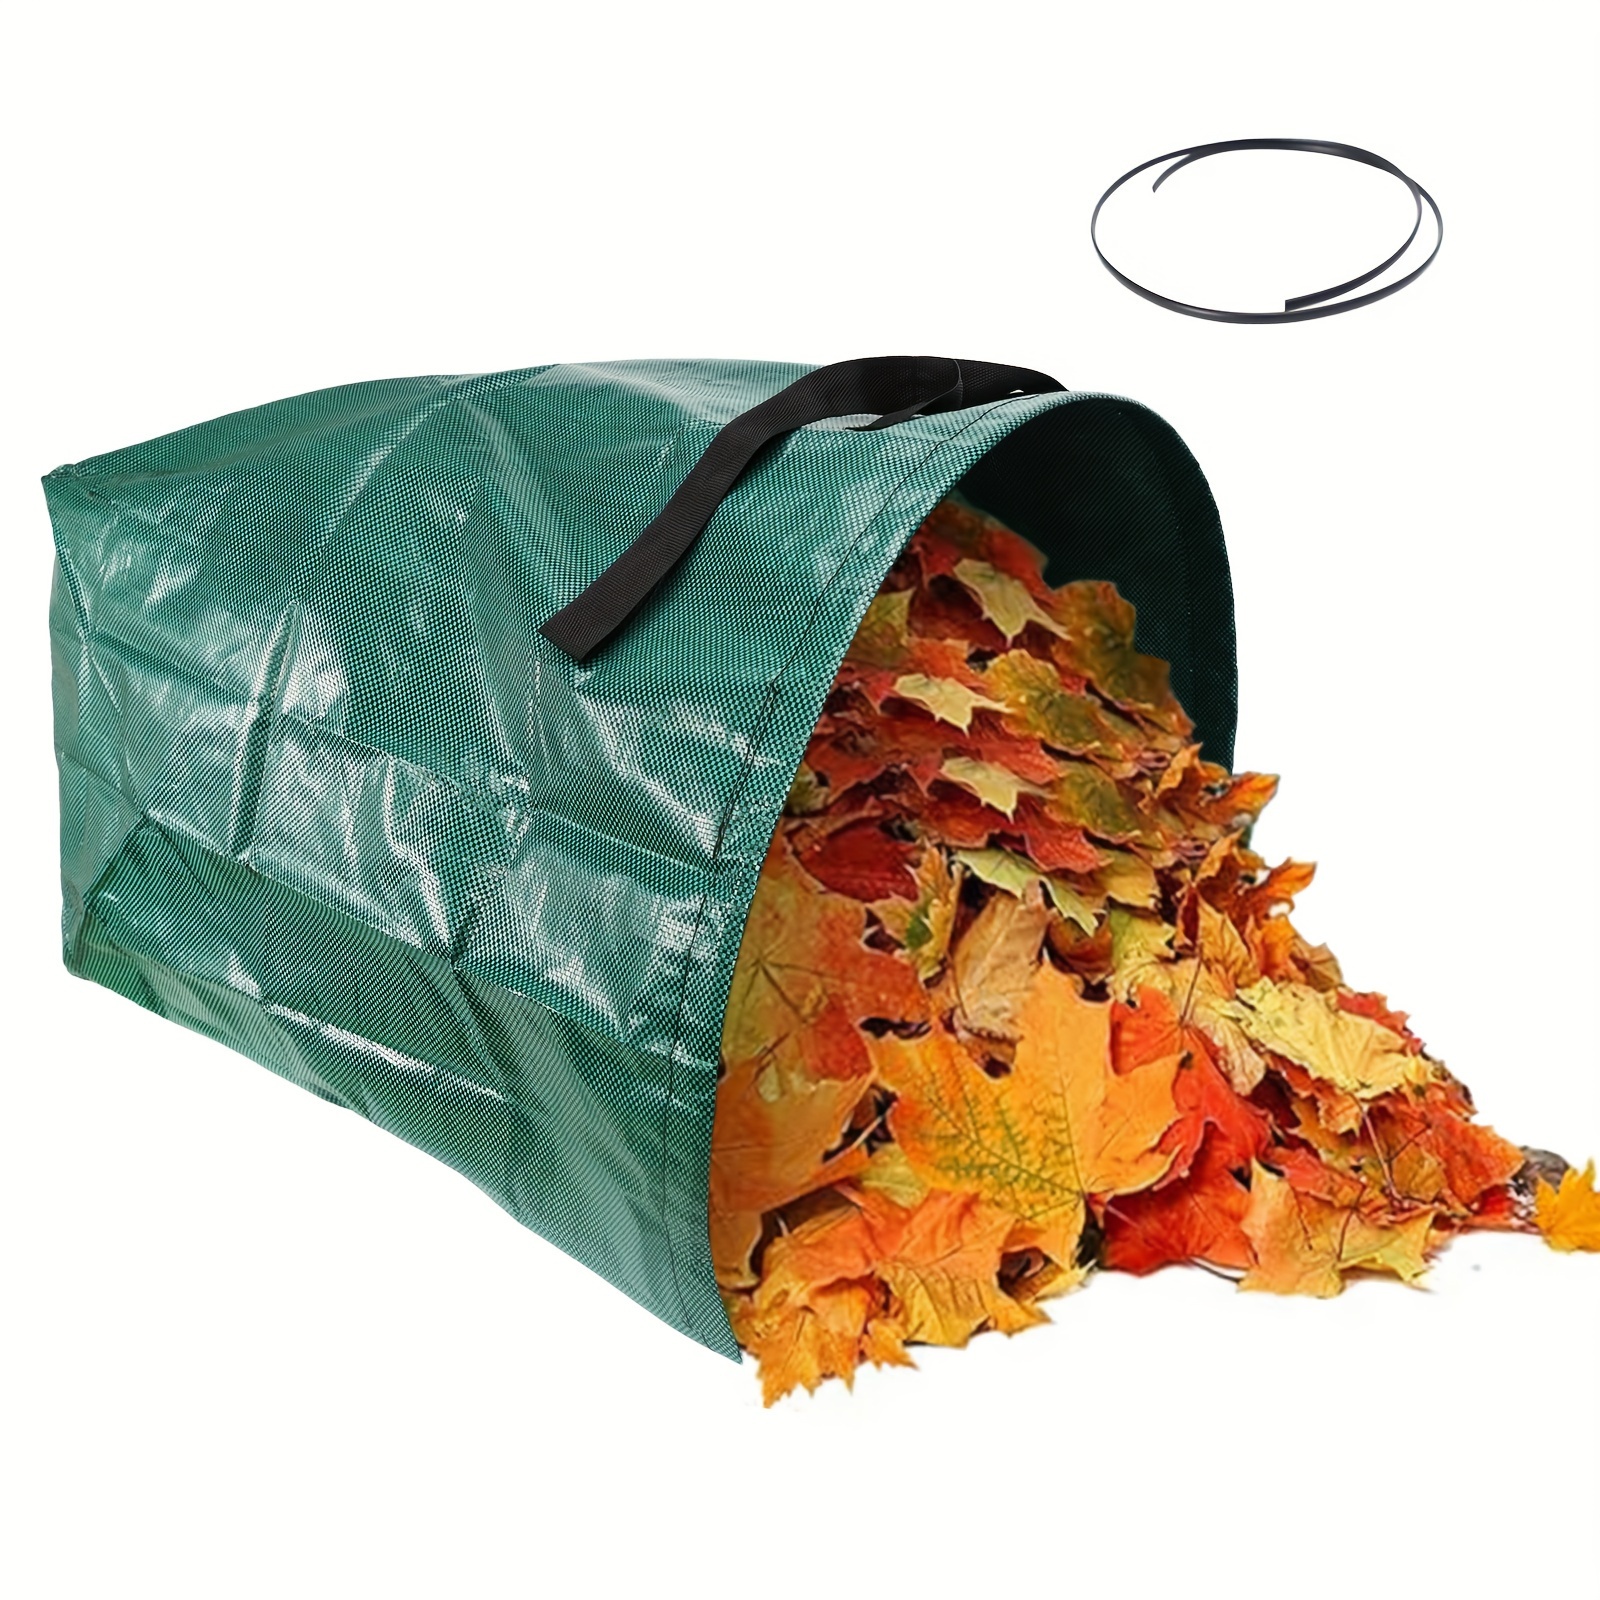 Large Yard Dustpan-Type Garden Bag for Collecting Leaves - Reuseable Heavy Duty Gardening Bags, Lawns Pool Garden Leaf Waste Bag - 53 Gallon per Bag